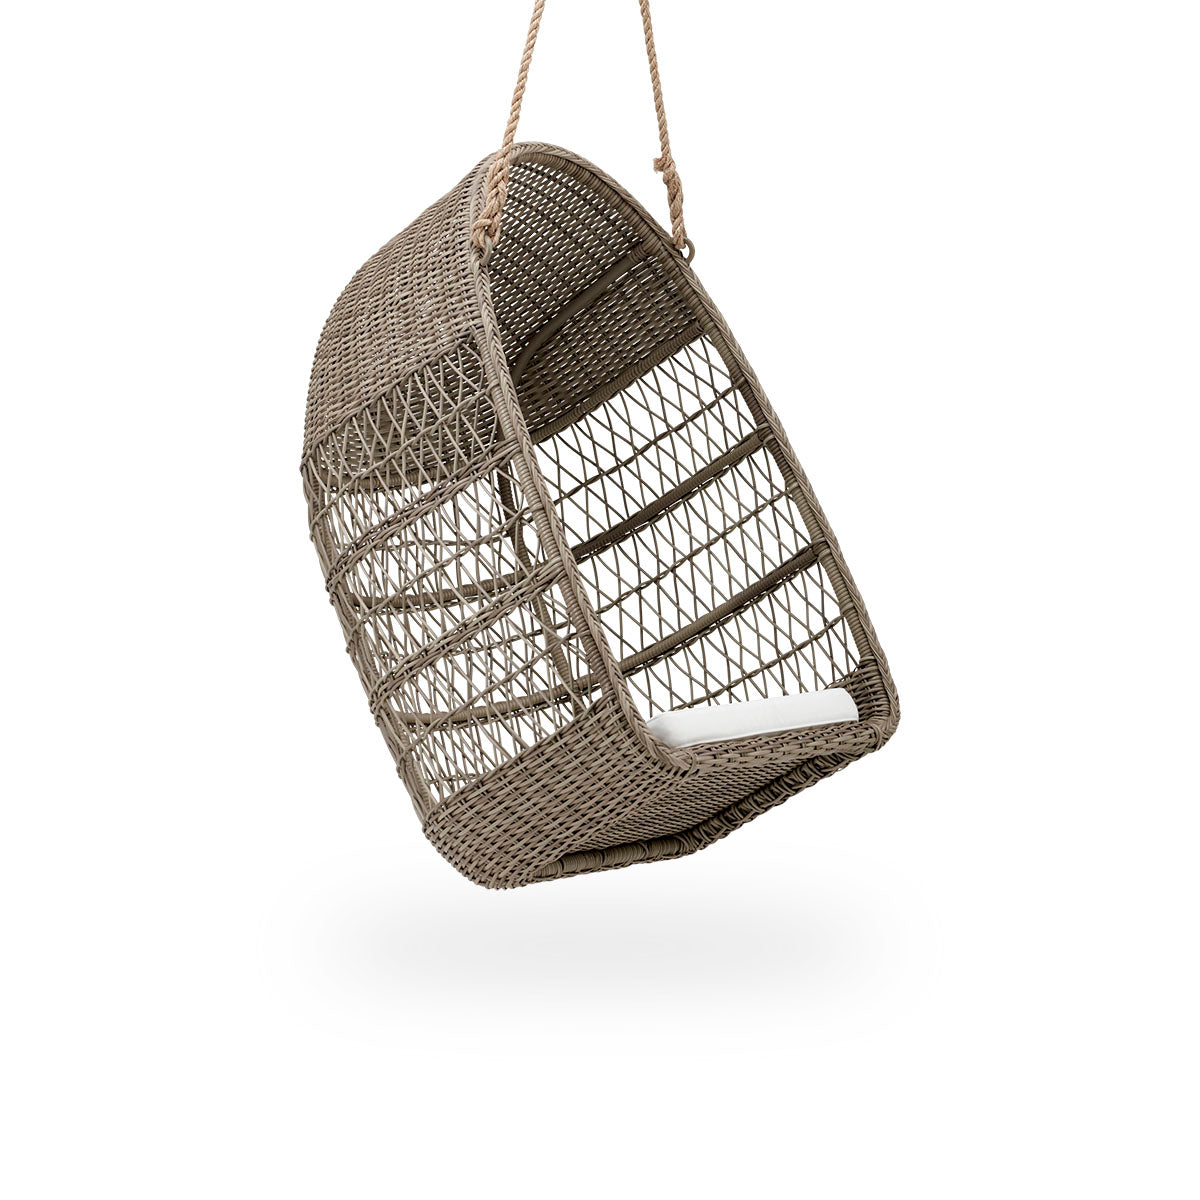 Evelyn Exterior Hanging Chair | Seat cushion by Sika